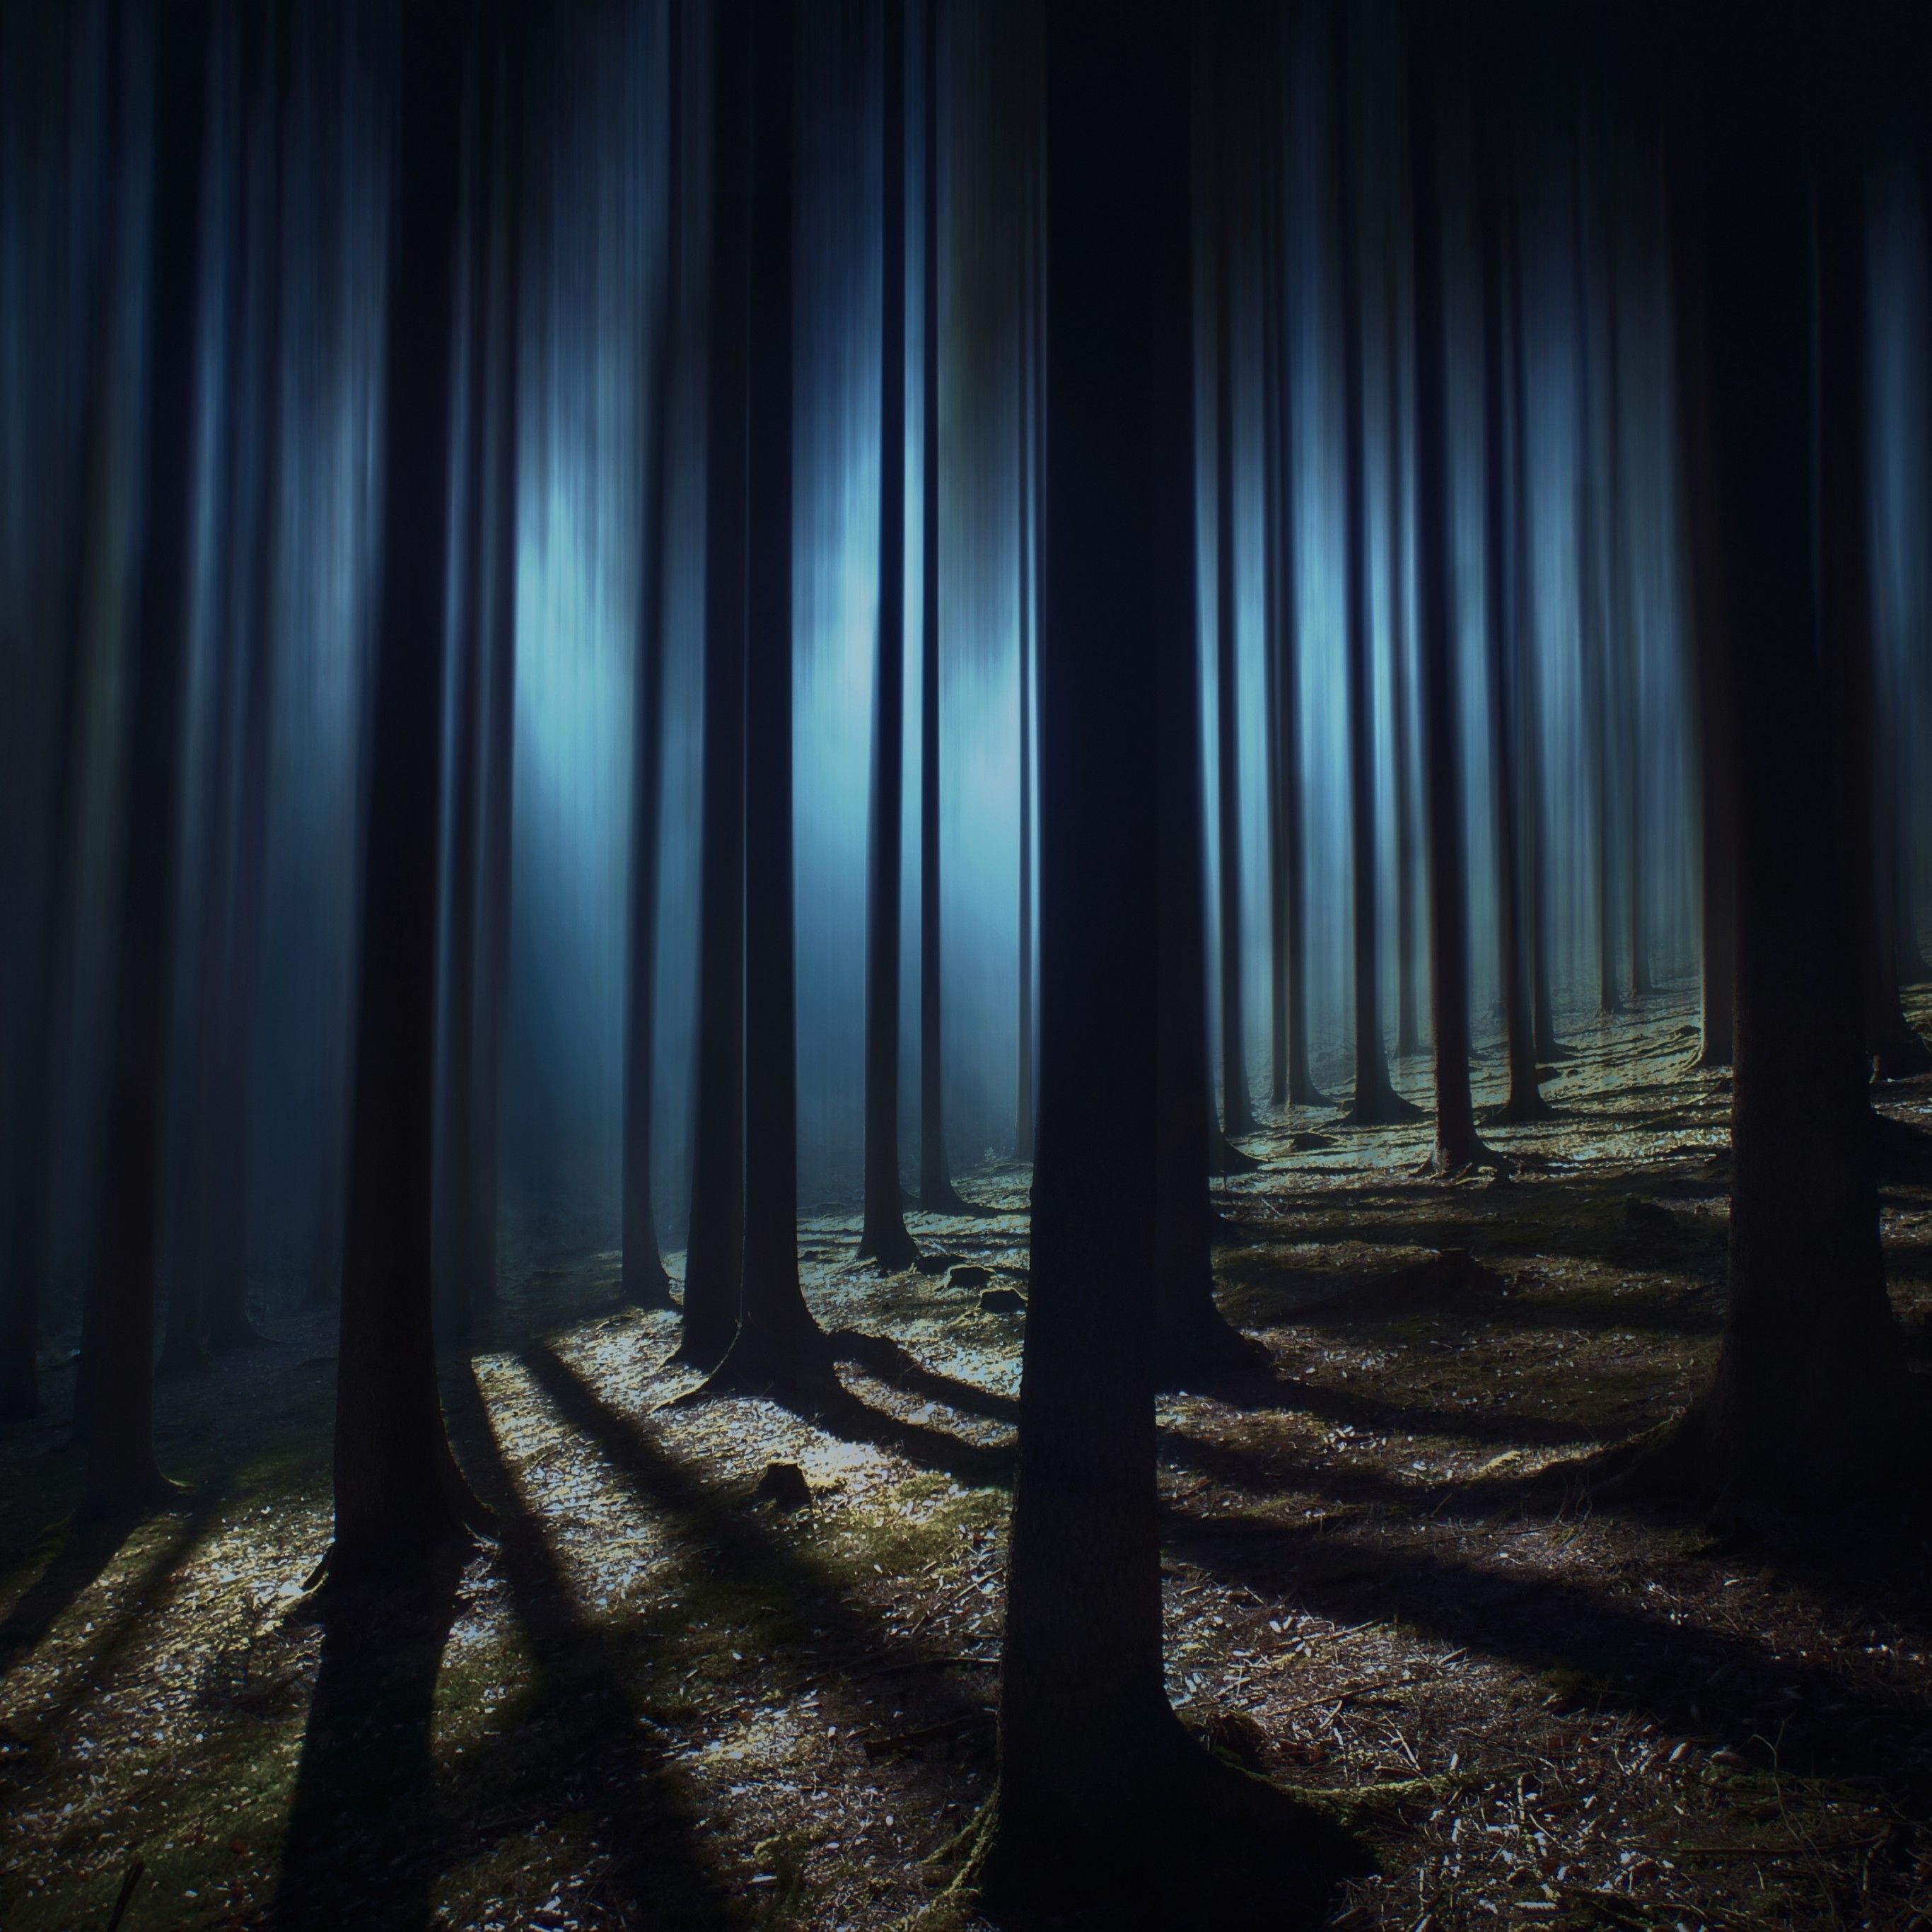 Dark Forest 4K Wallpaper, Woods, Night time, Dark, Shadow, Tall Trees, Haunted, Mystery, 5K, Nature